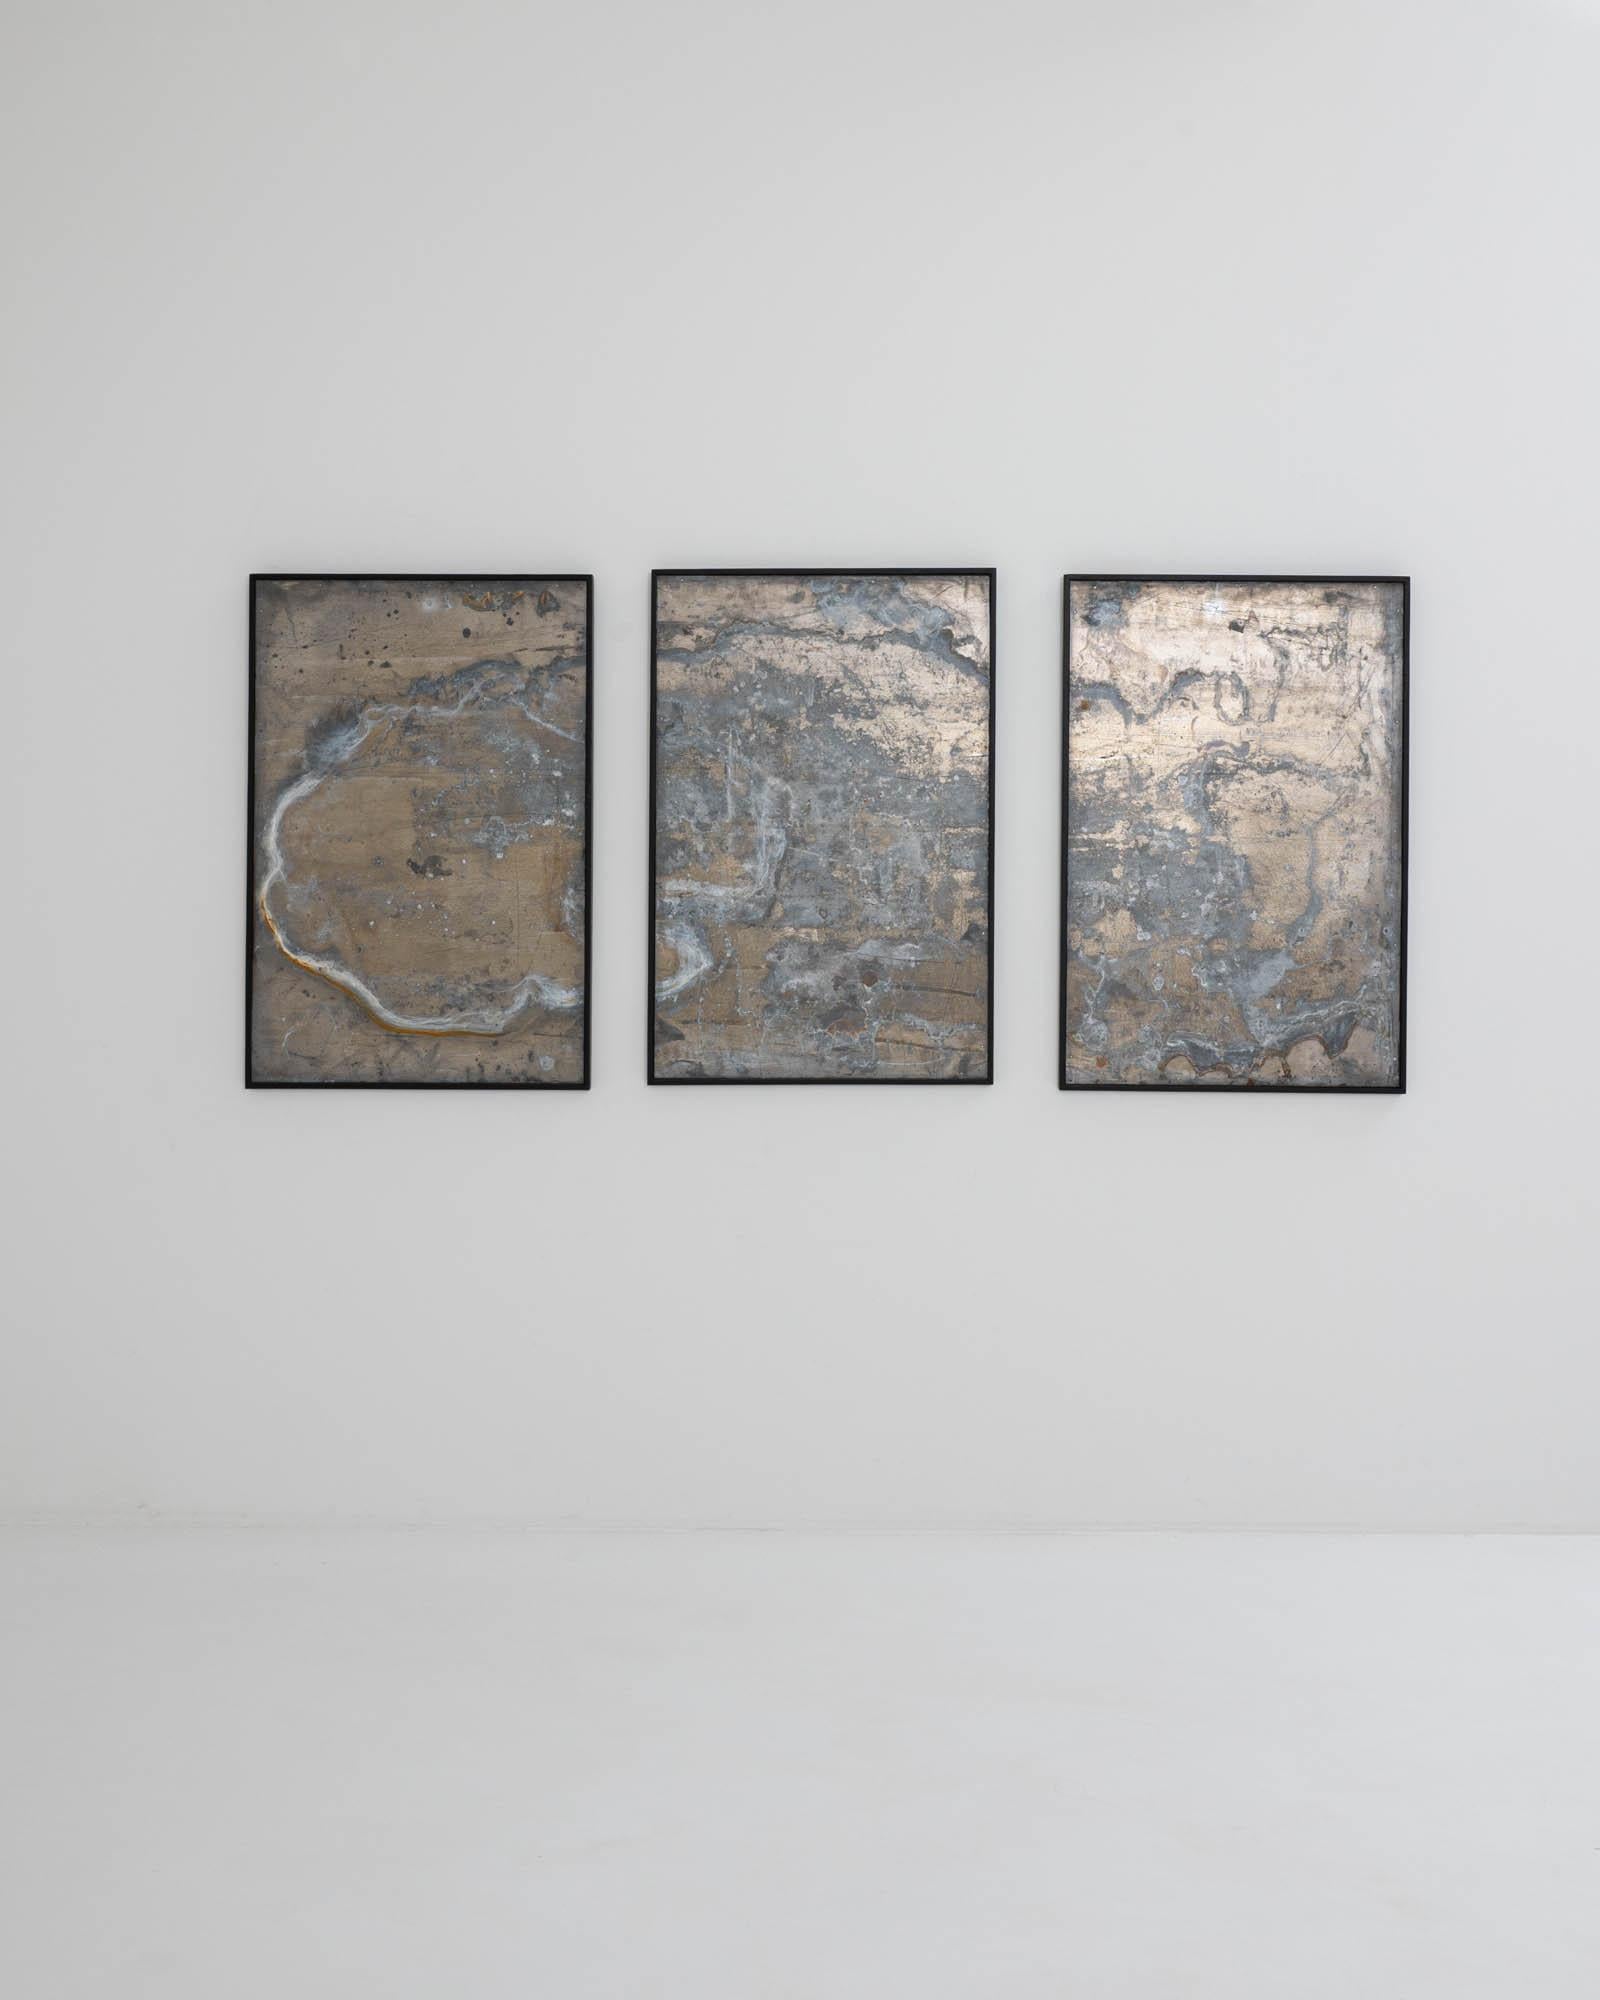 A set of three metal artworks with wooden frames. The clean black frames of these three decorative artworks allow the textured maximalism of the pieces to shine, bringing forth the mesmerizing network of details in stark relief. Tendrils of silver